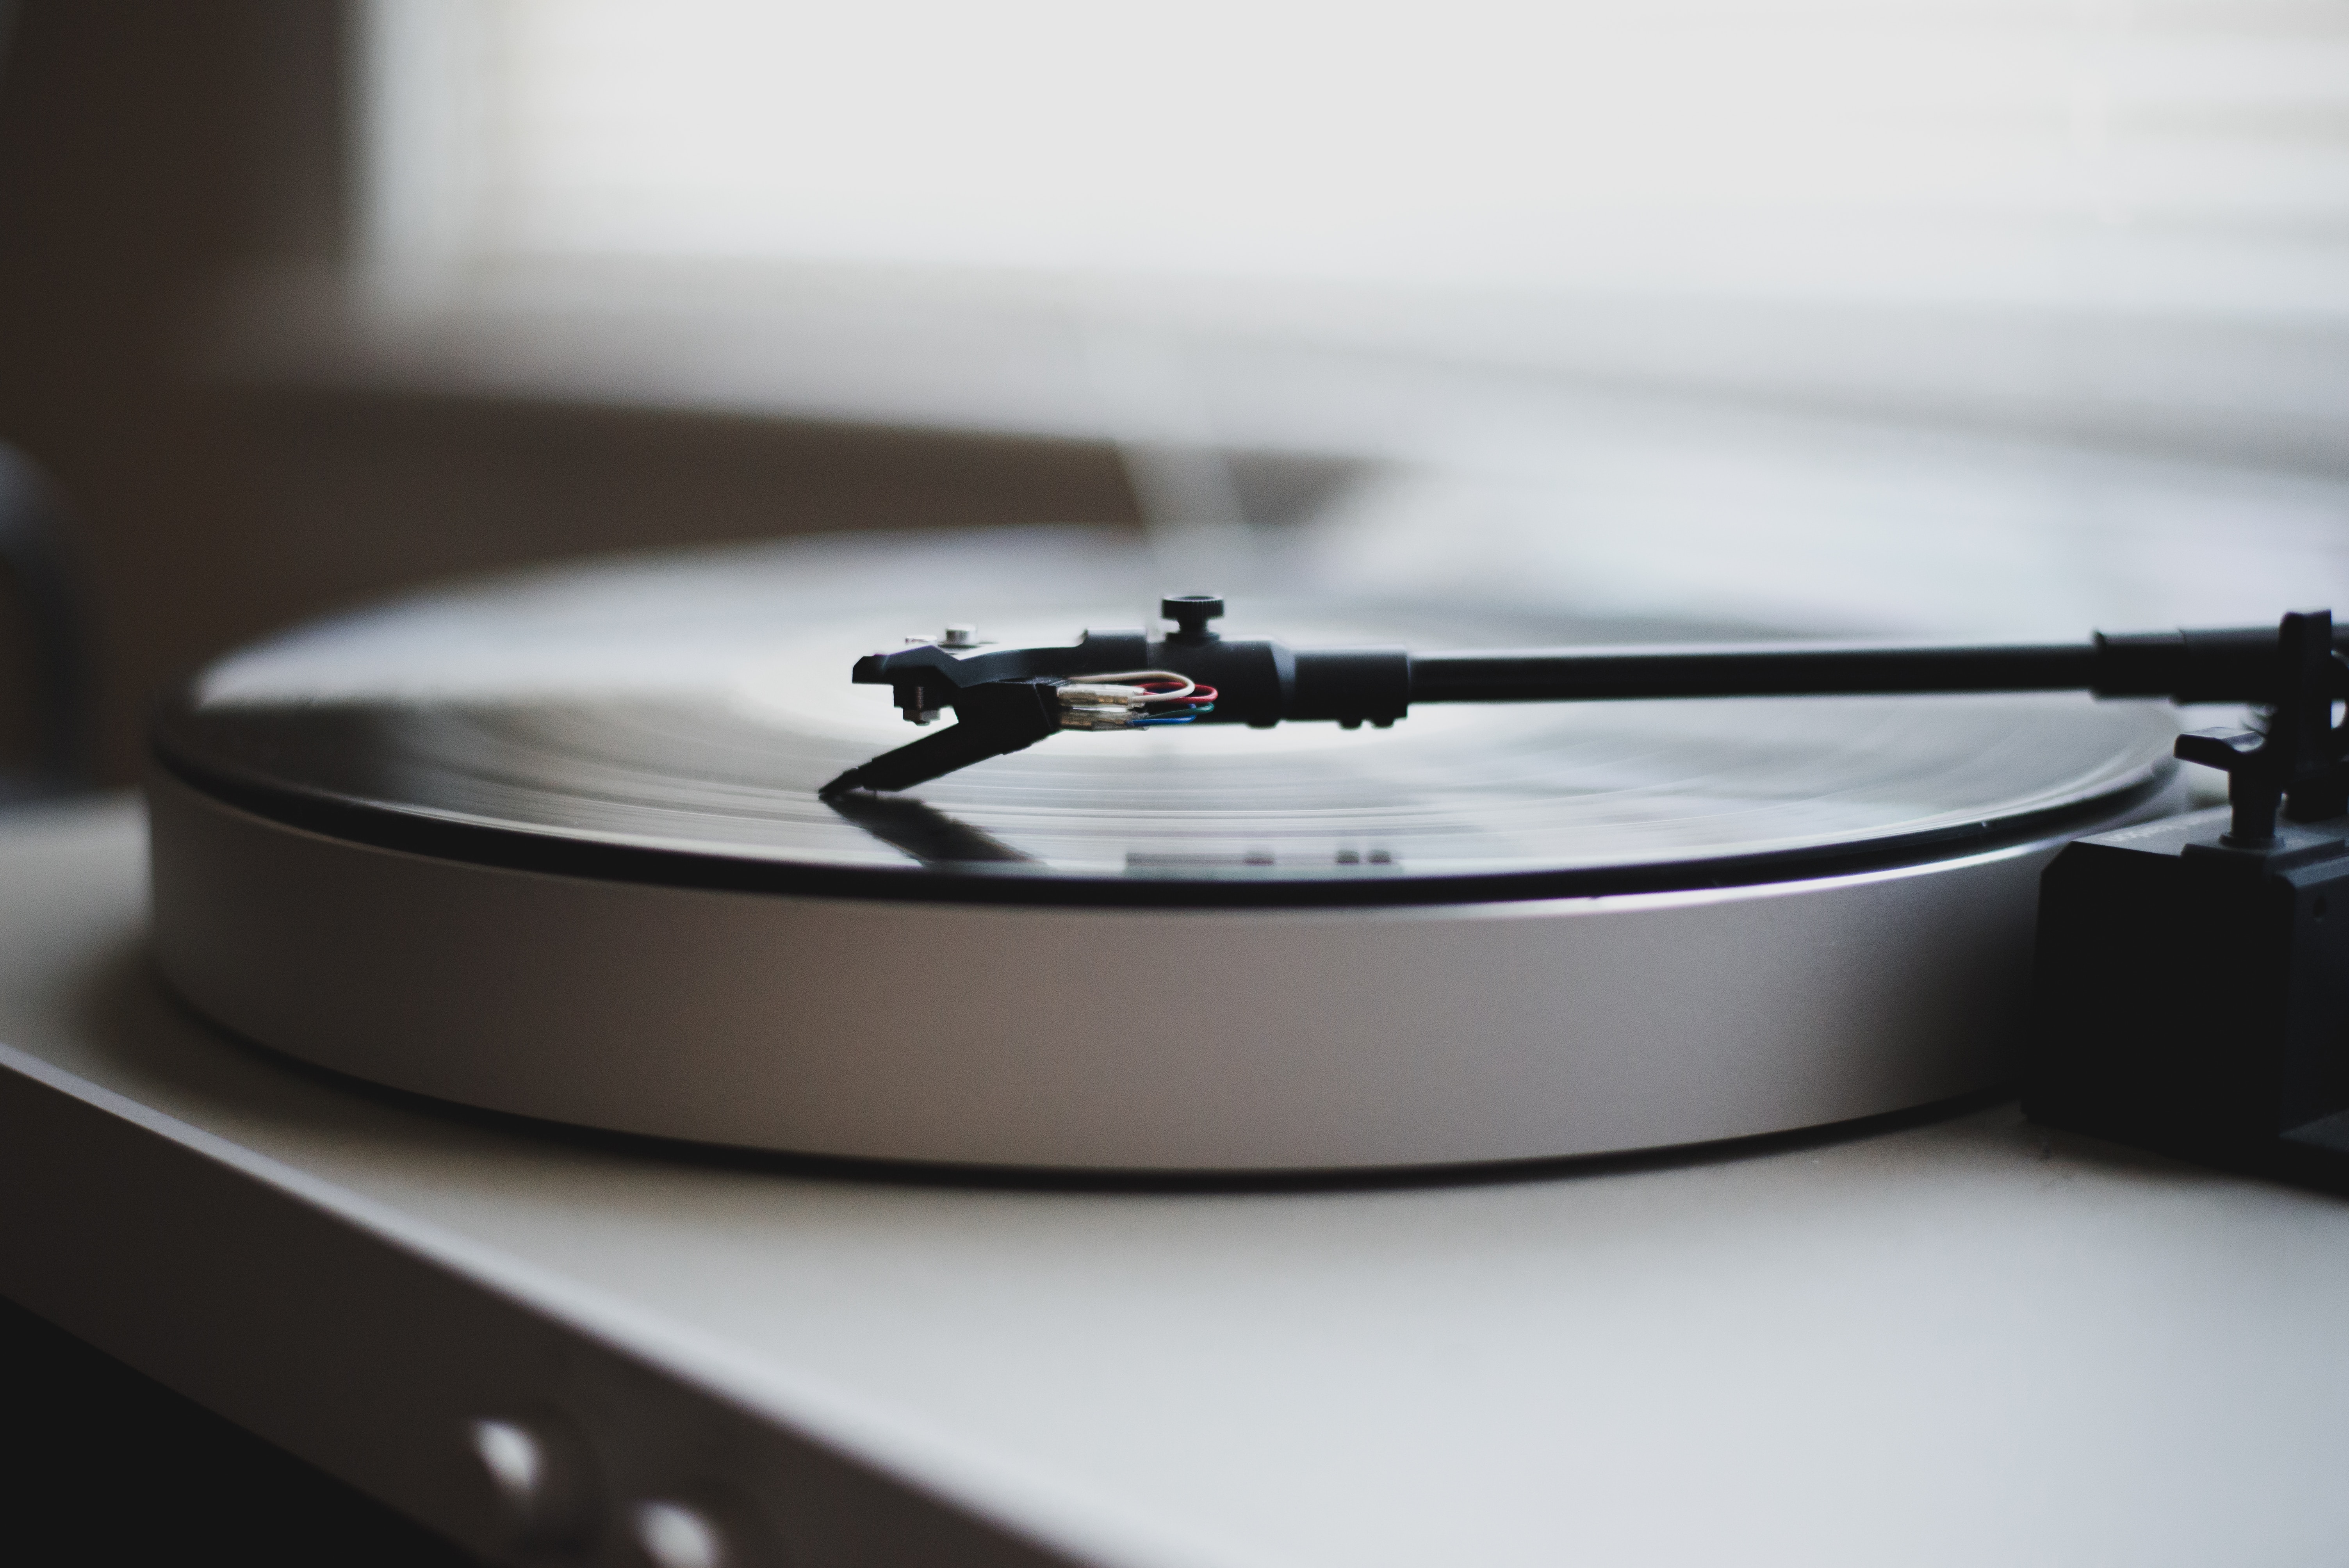 ikeas-new-record-player-looks-better-than-expected